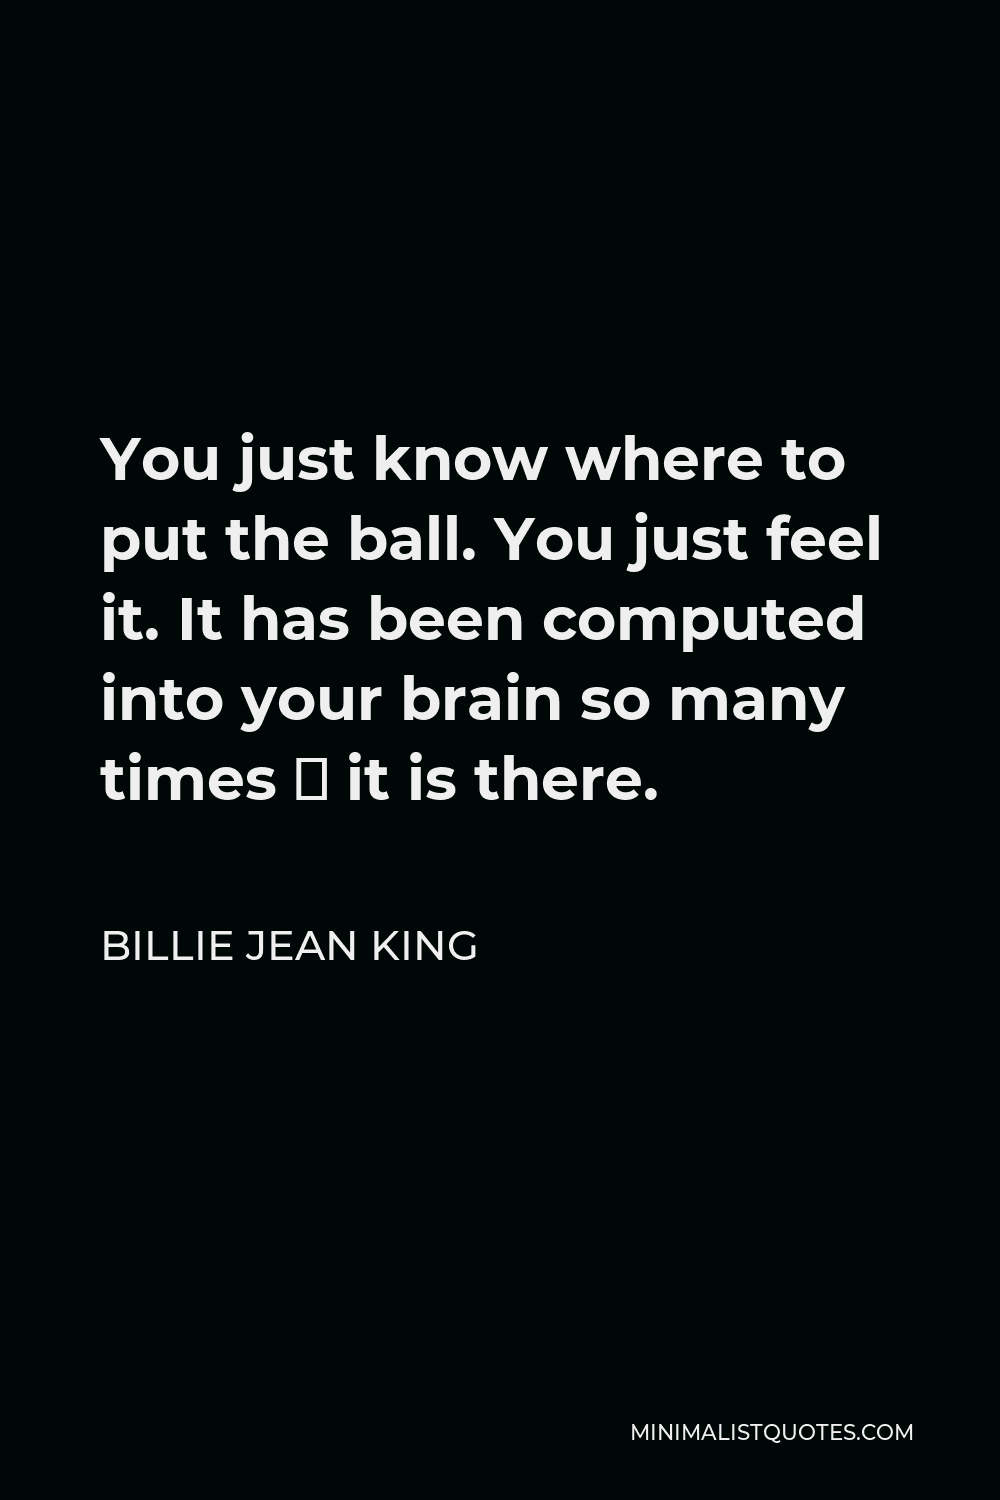 Billie Jean King Quote - You just know where to put the ball. You just feel it. It has been computed into your brain so many times ­ it is there.